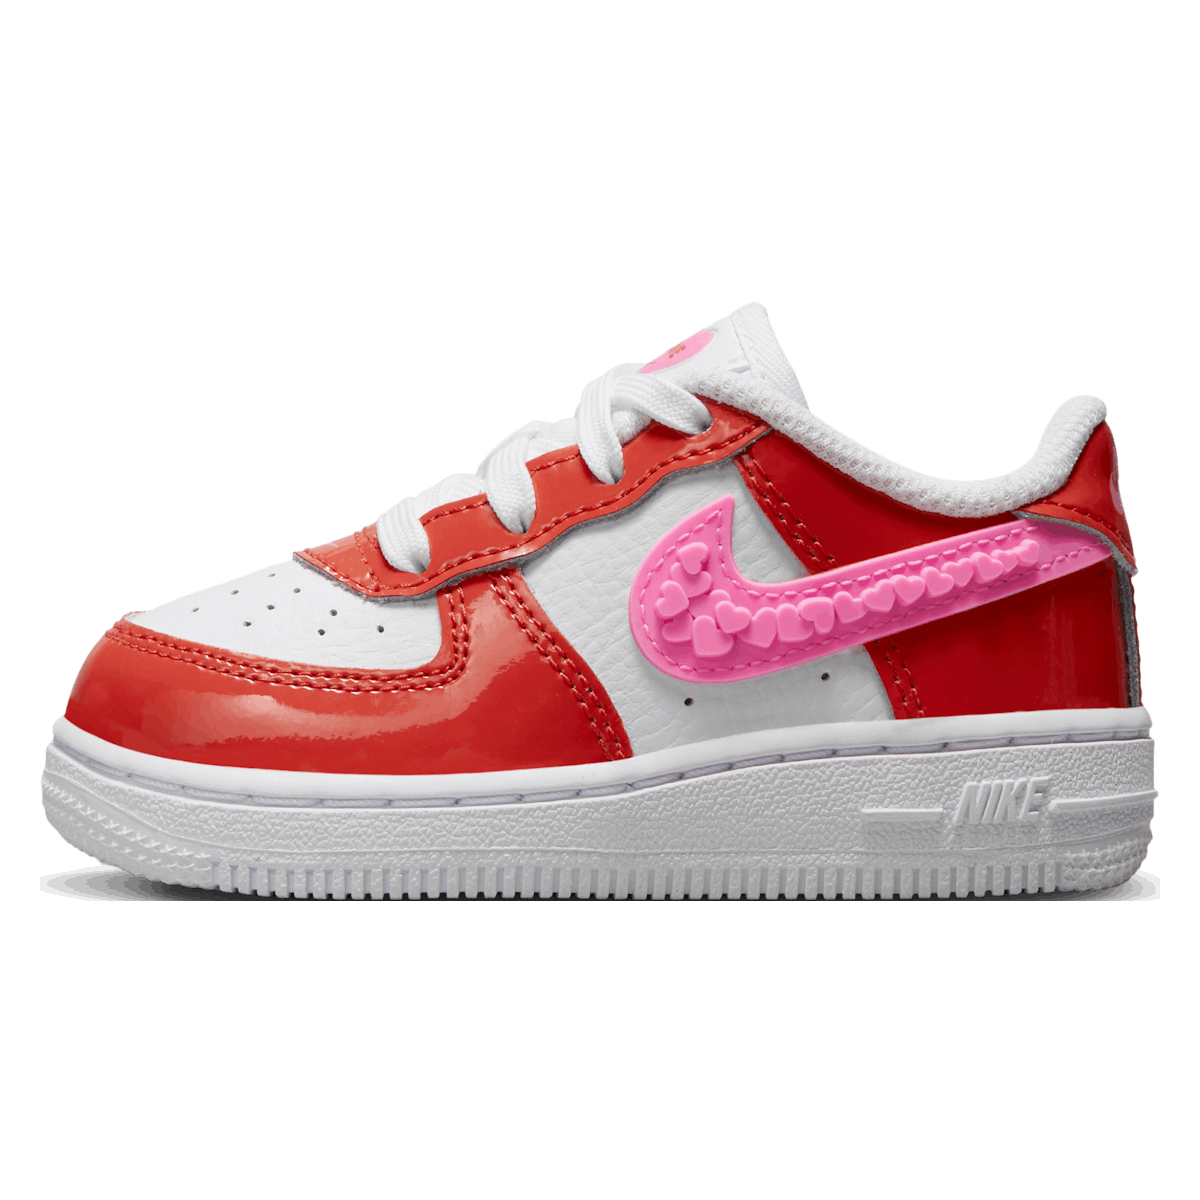 Nike Air Force 1 LV8 TD "Valentine's Day"